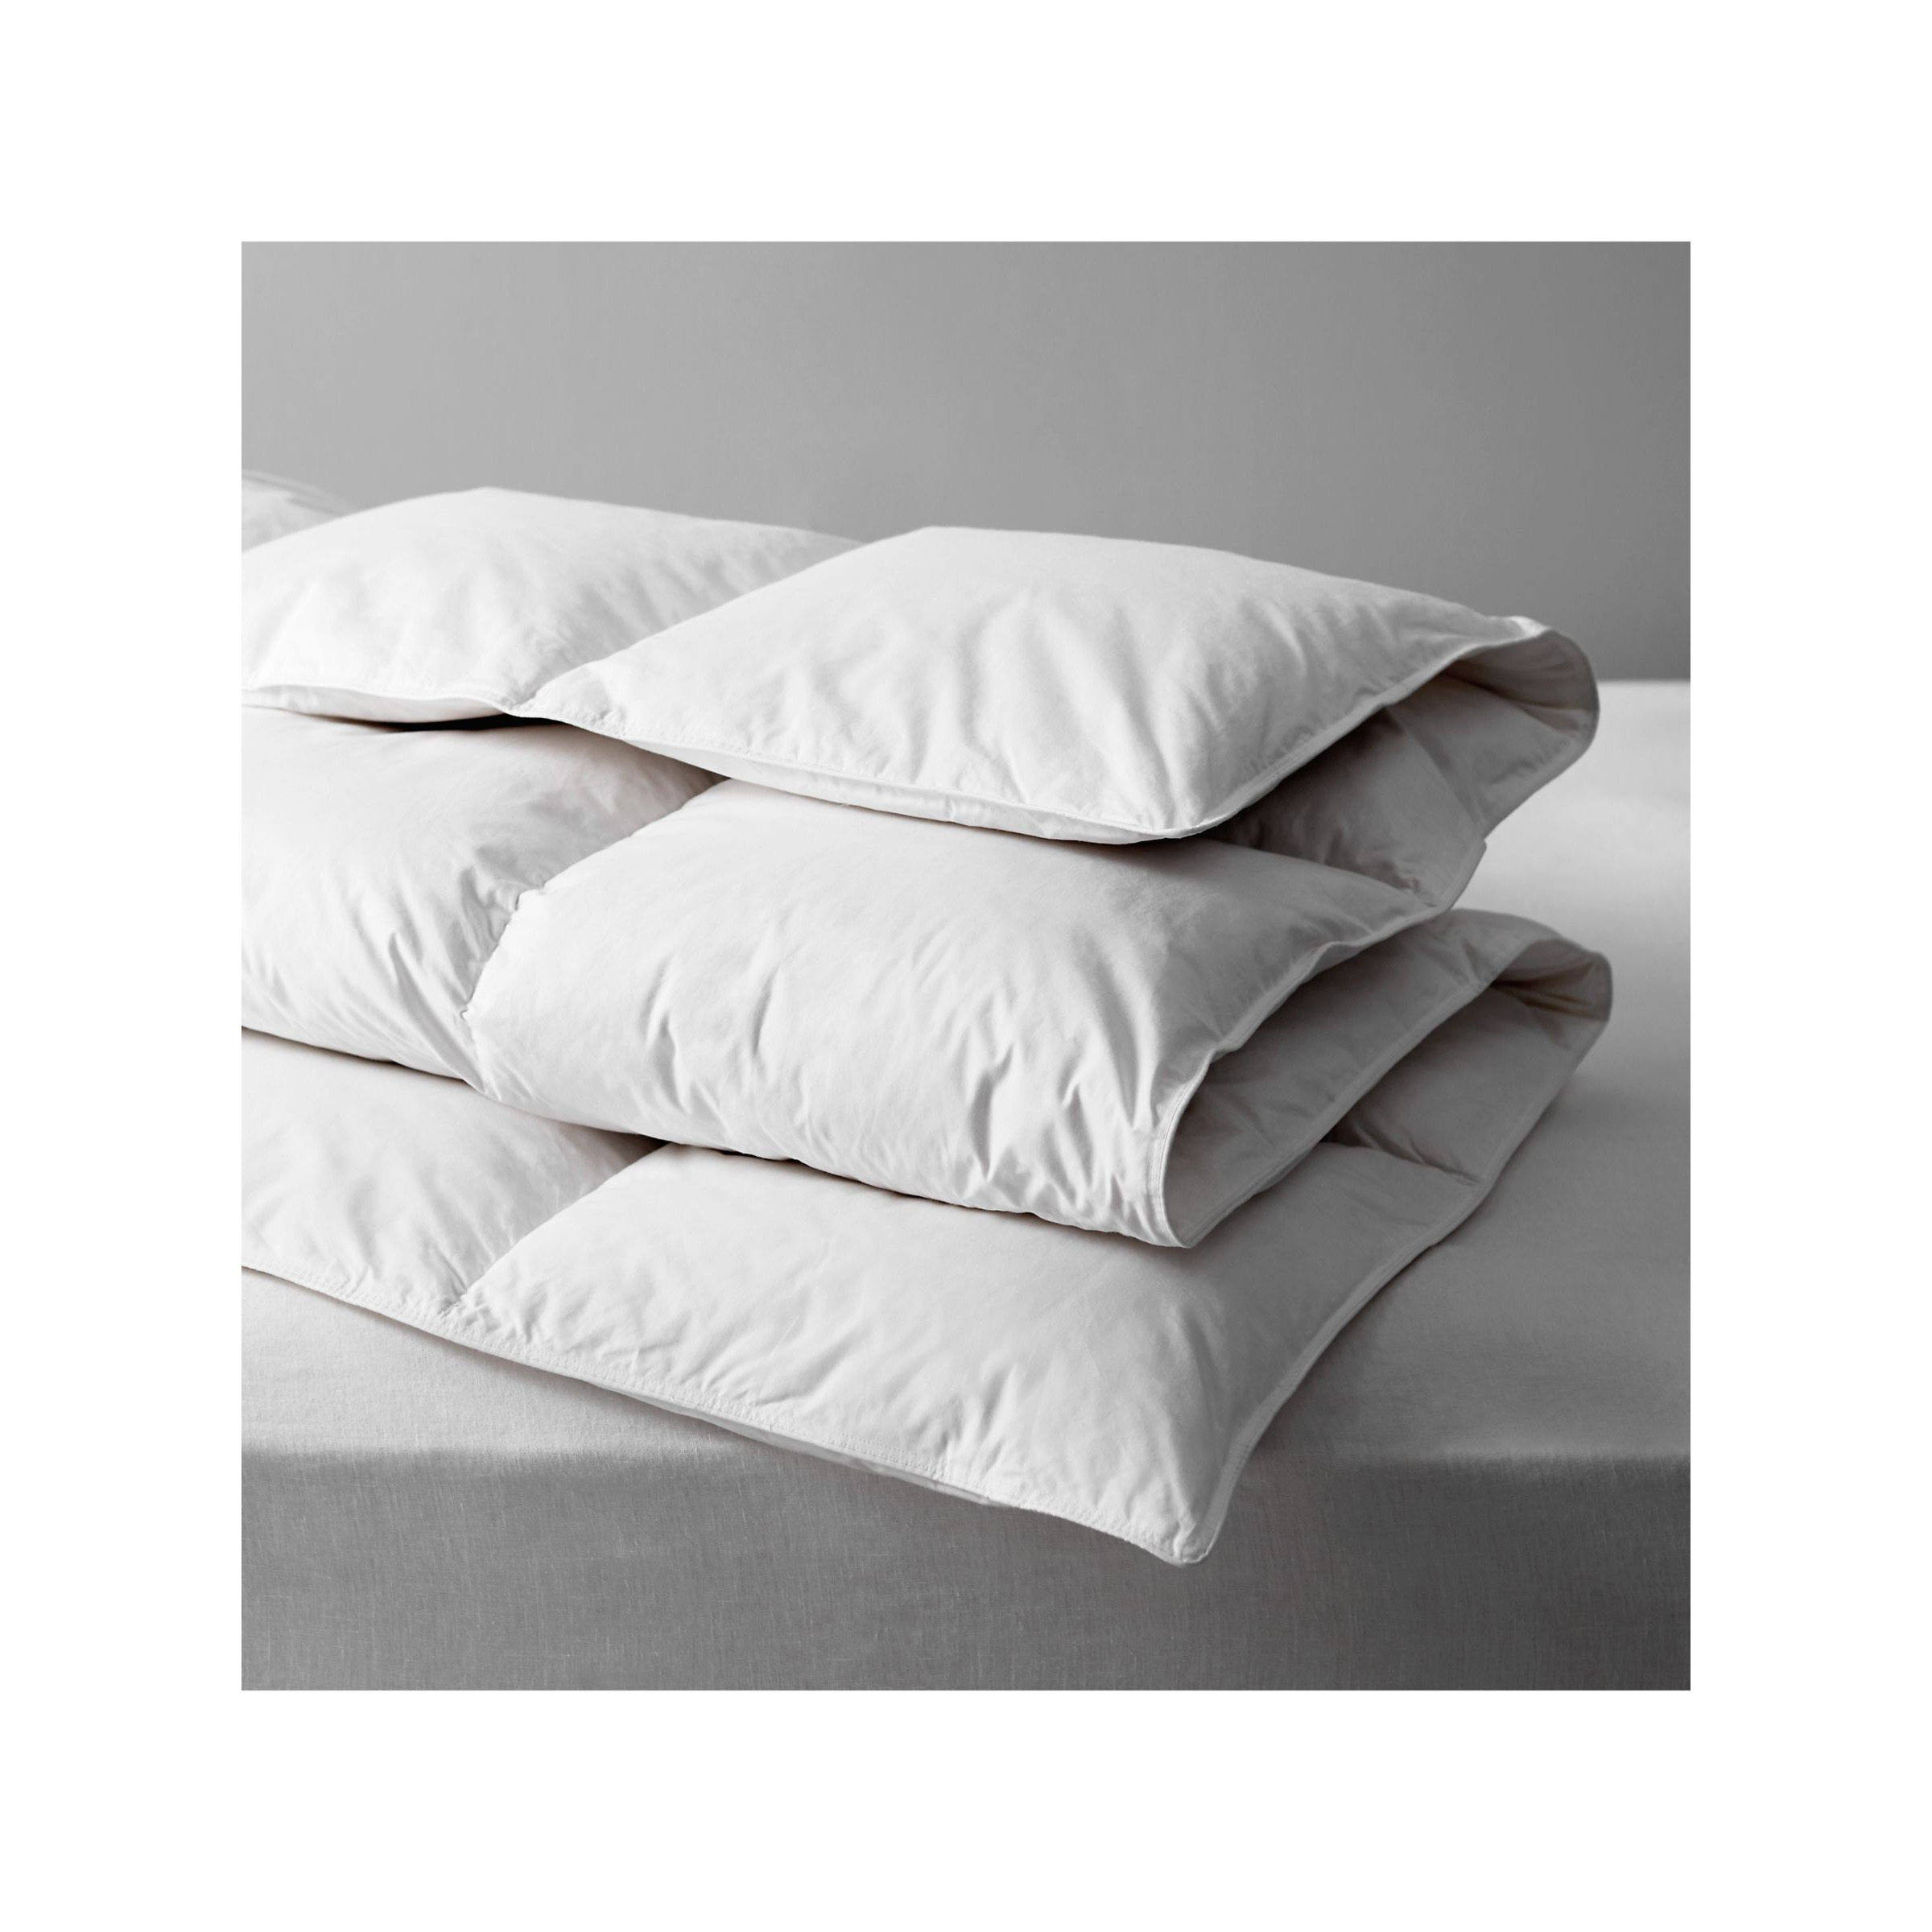 John Lewis Natural Duck Feather and Down Duvet, 13.5 Tog - image 1